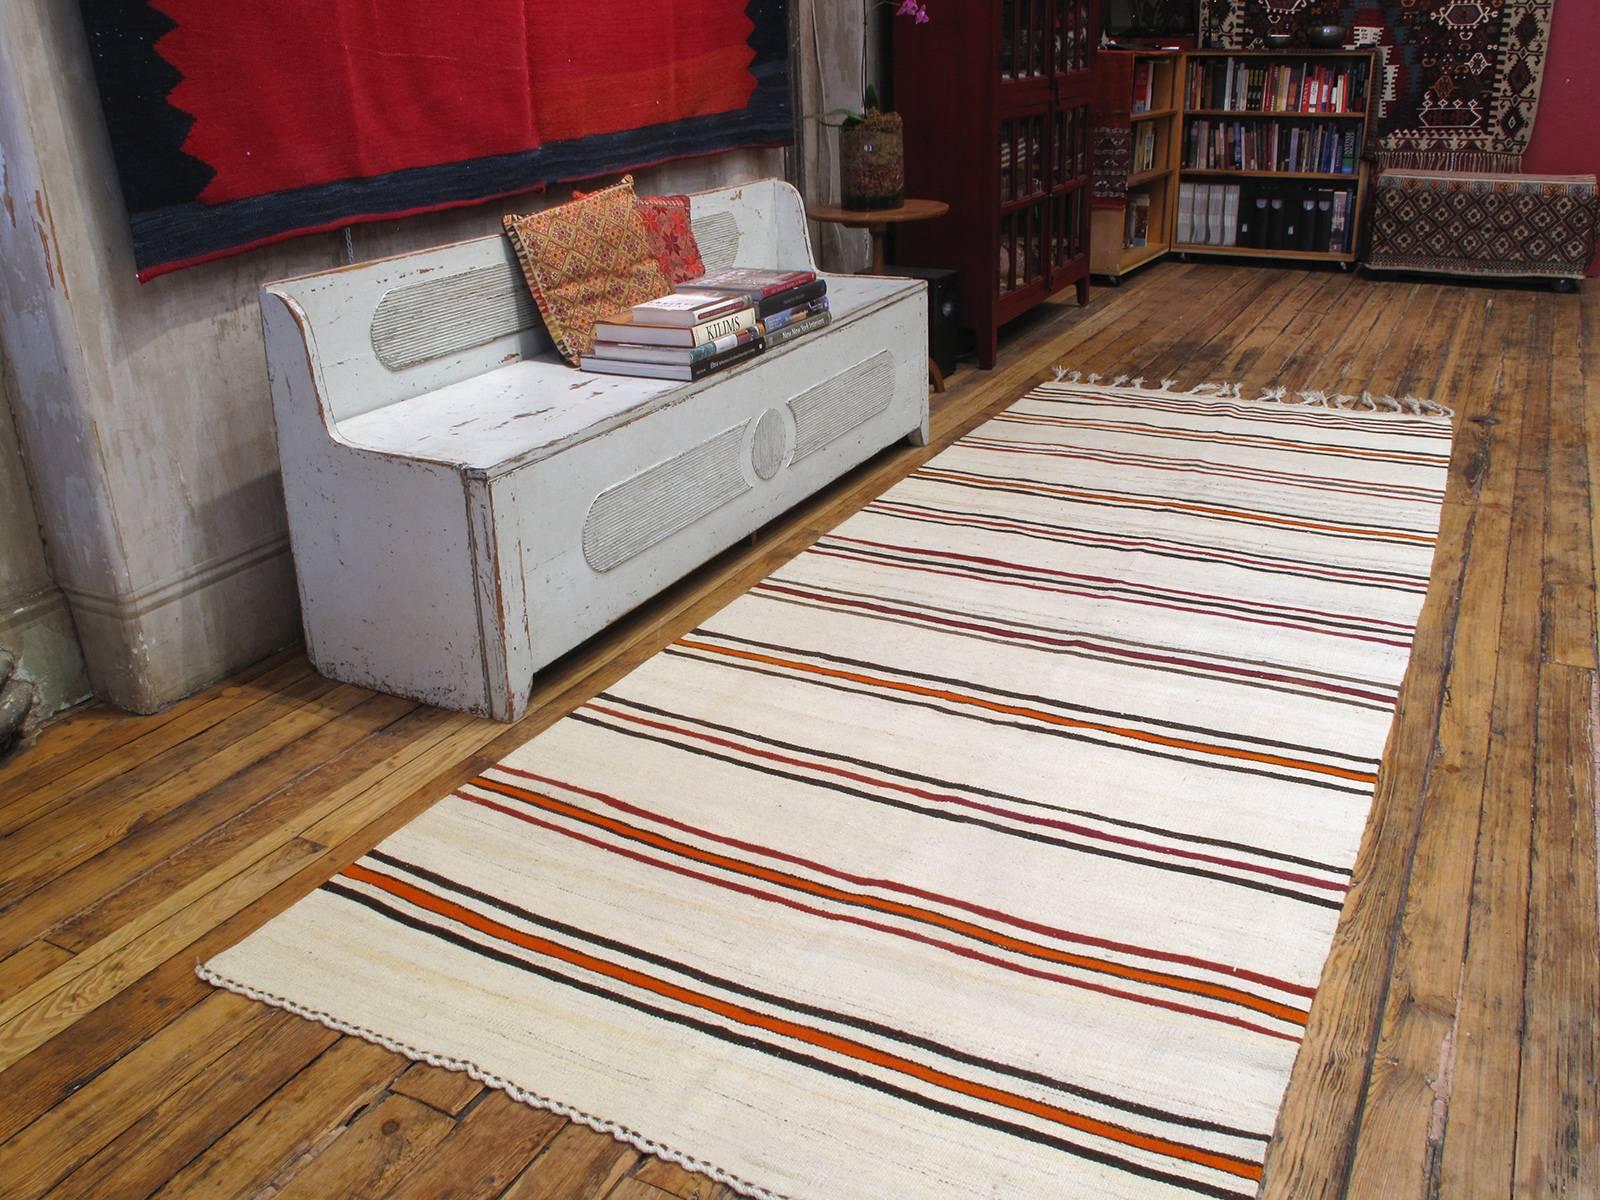 Striped Kilim, wide runner rug. An old tribal flat-weave runner rug from Central Turkey, woven in the characteristic wide runner format, intended as a simple utilitarian floor cover. In its authentic simplicity, this rug has great modern/Minimalist